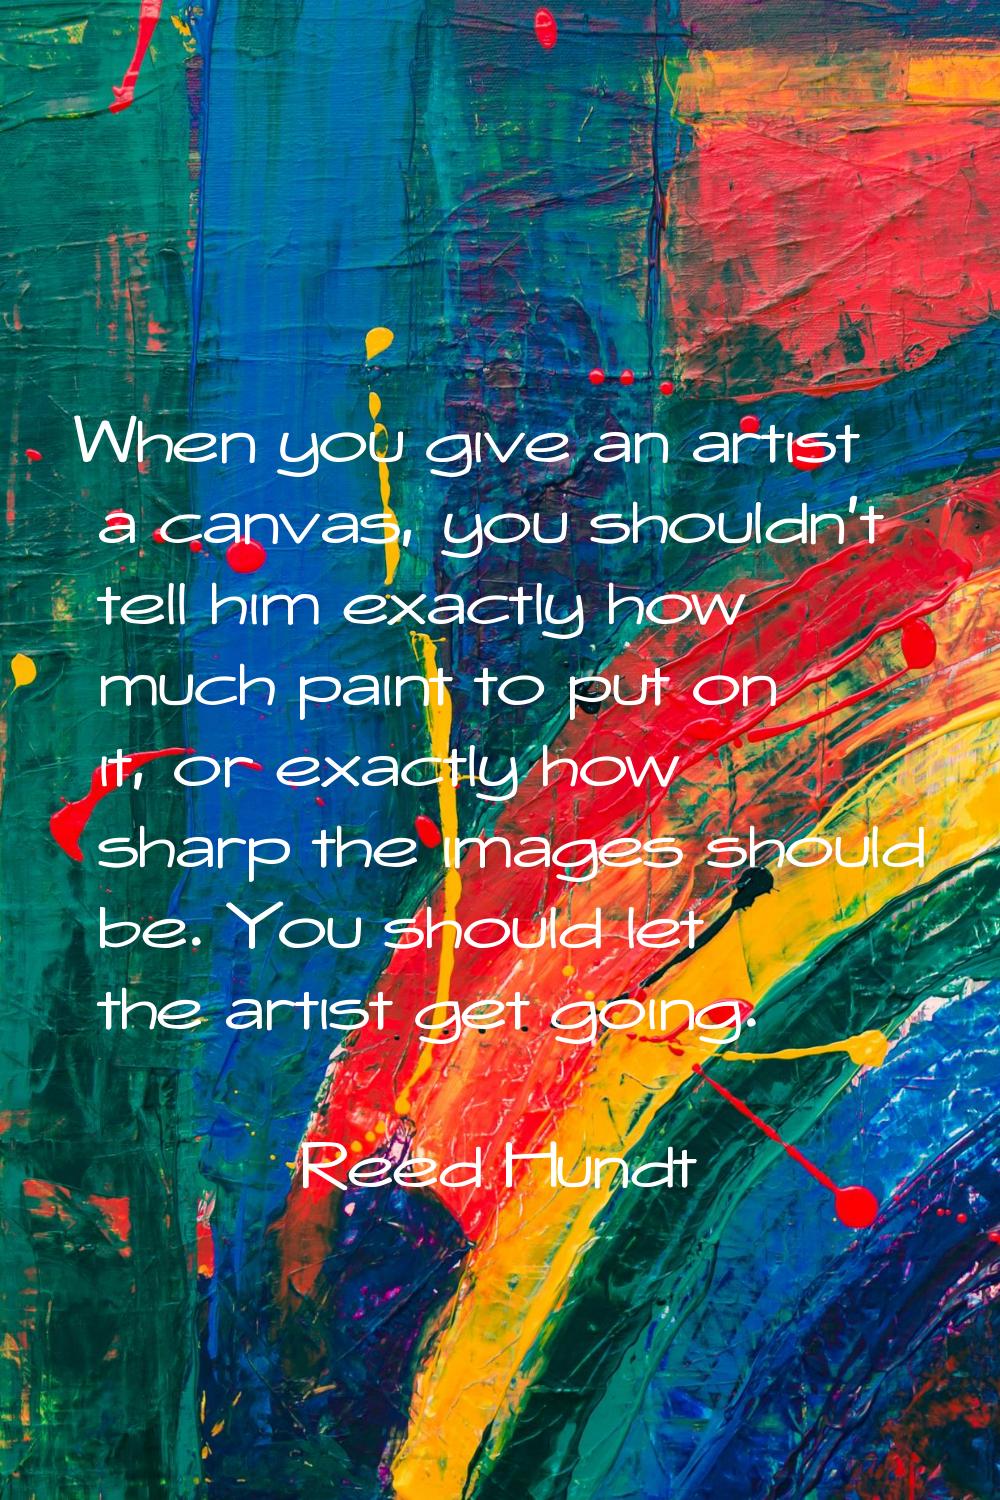 When you give an artist a canvas, you shouldn't tell him exactly how much paint to put on it, or ex